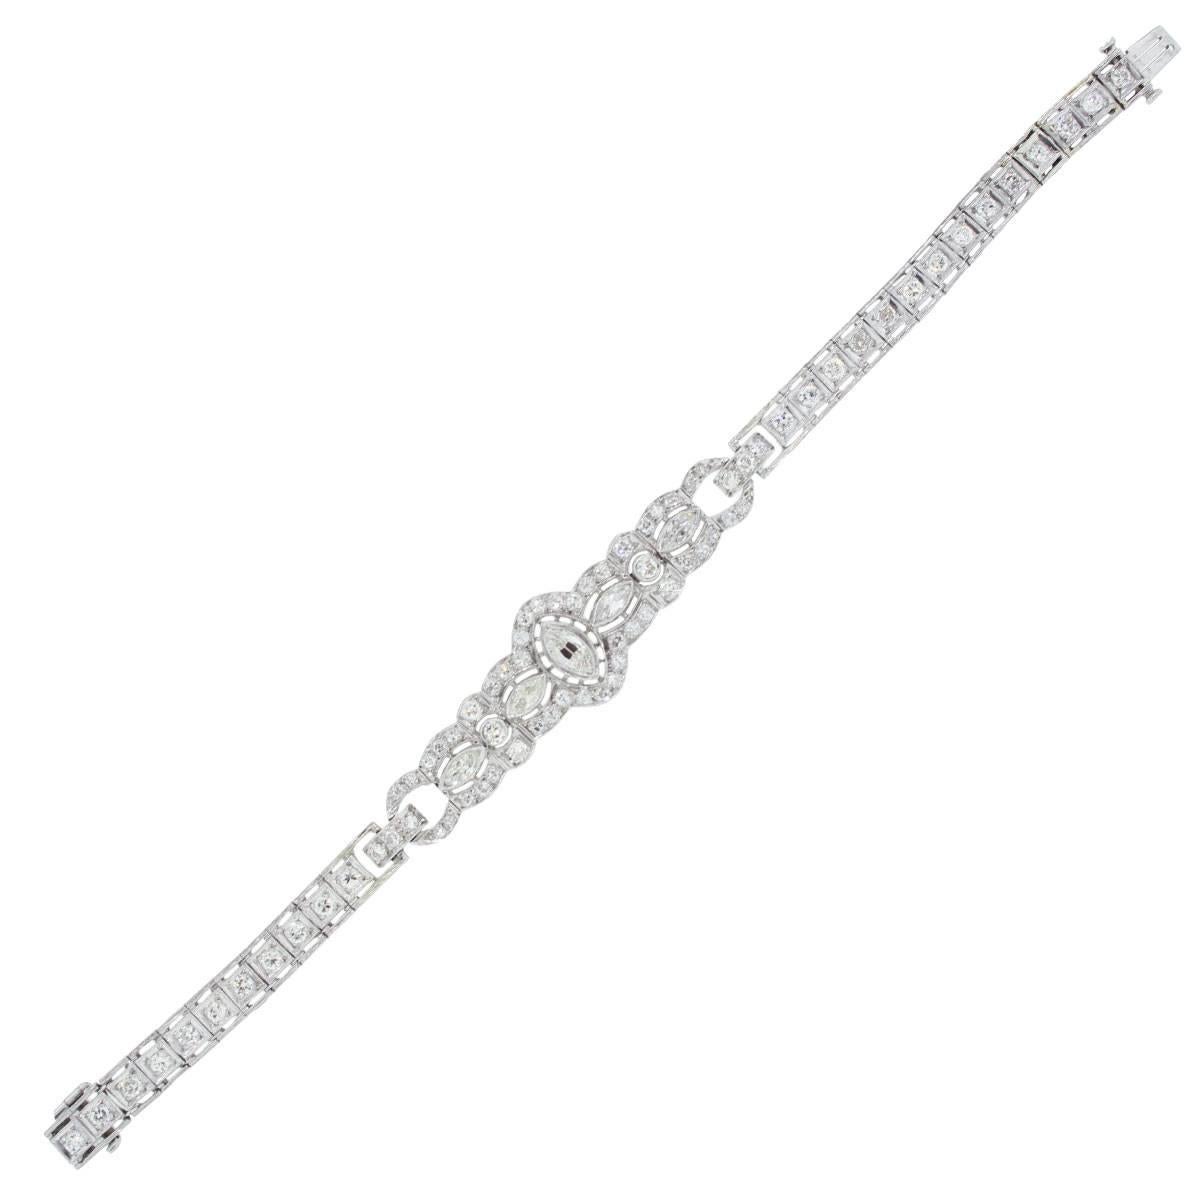 Material: Platinum
Diamond Details: Approximately 3.50ctw of marquise and round brilliant diamonds. Diamonds are G/H in color and VS in clarity
Clasp: Tongue in box clasp with safety latch
Measurements: 6.75